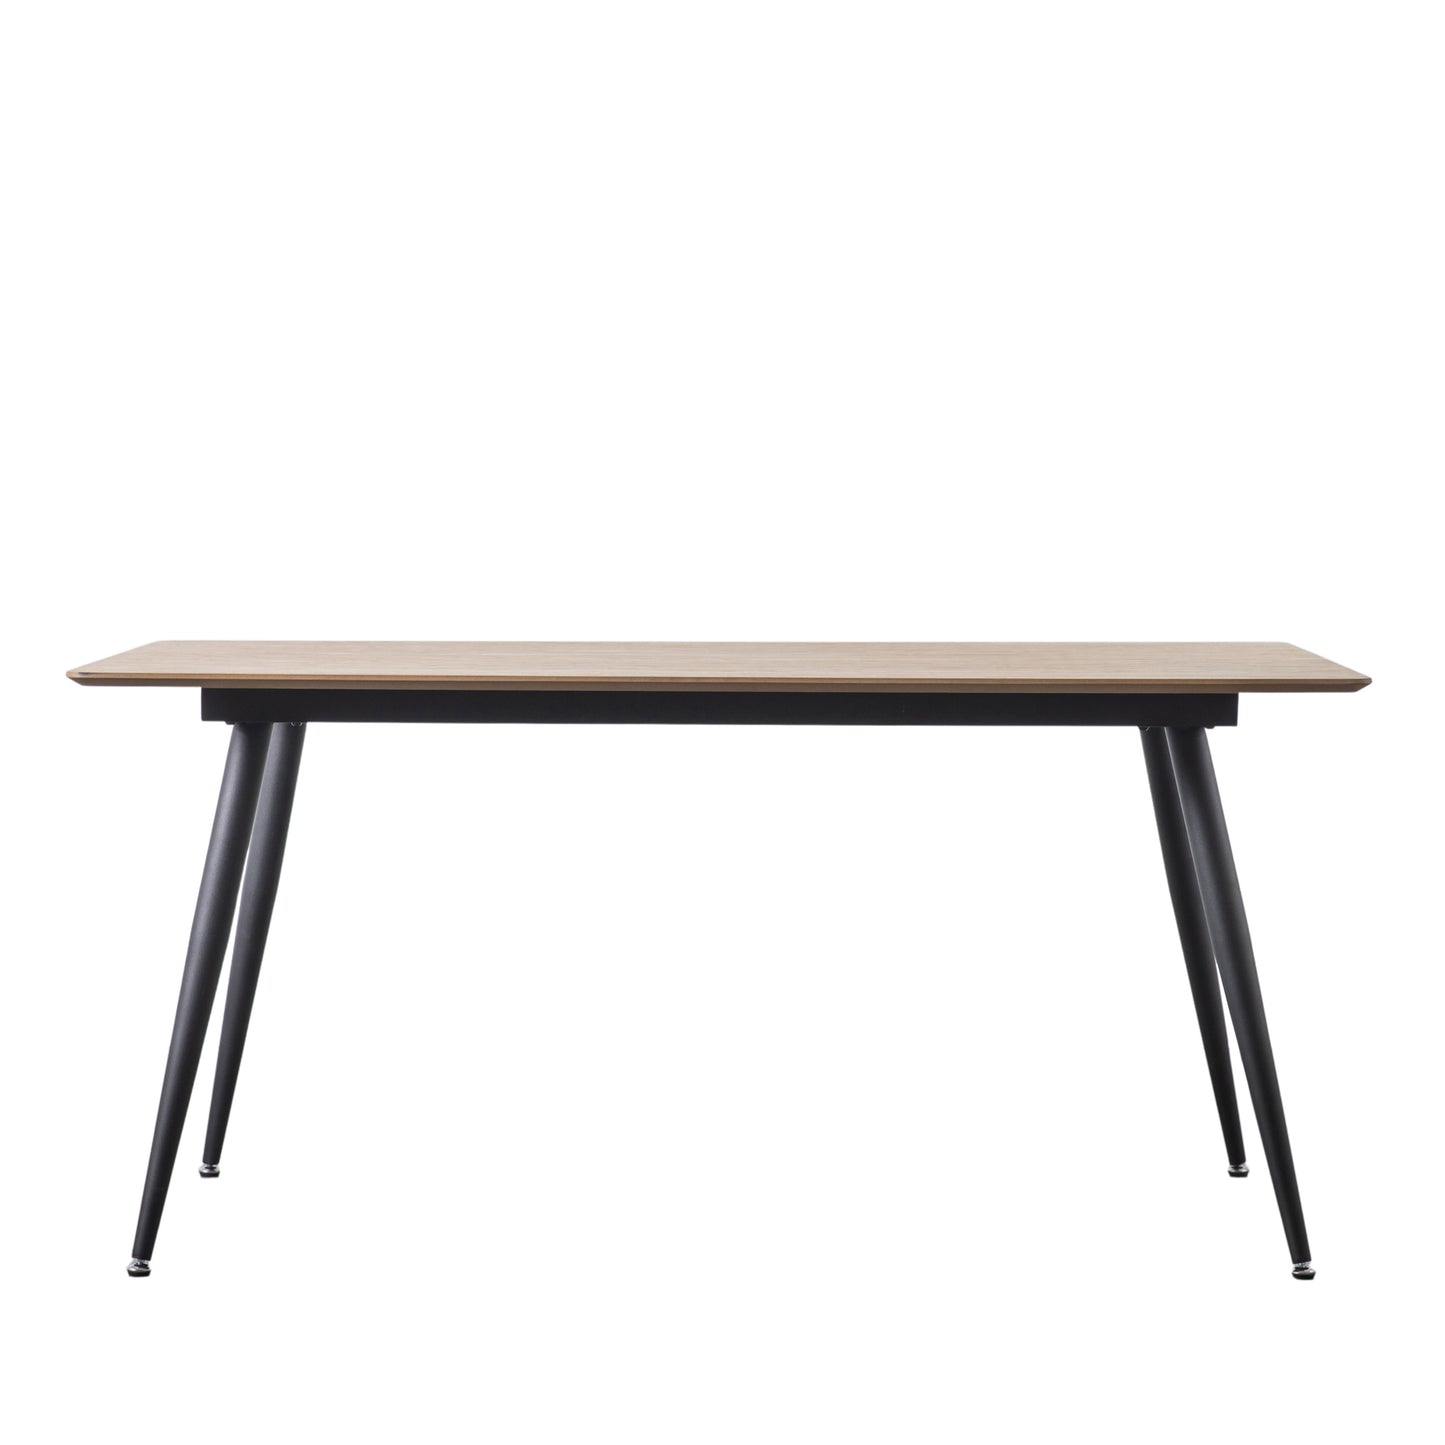 Load image into Gallery viewer, A chic Ashford Dining Table with black legs and a wooden top, perfect for interior decor and home furniture.
